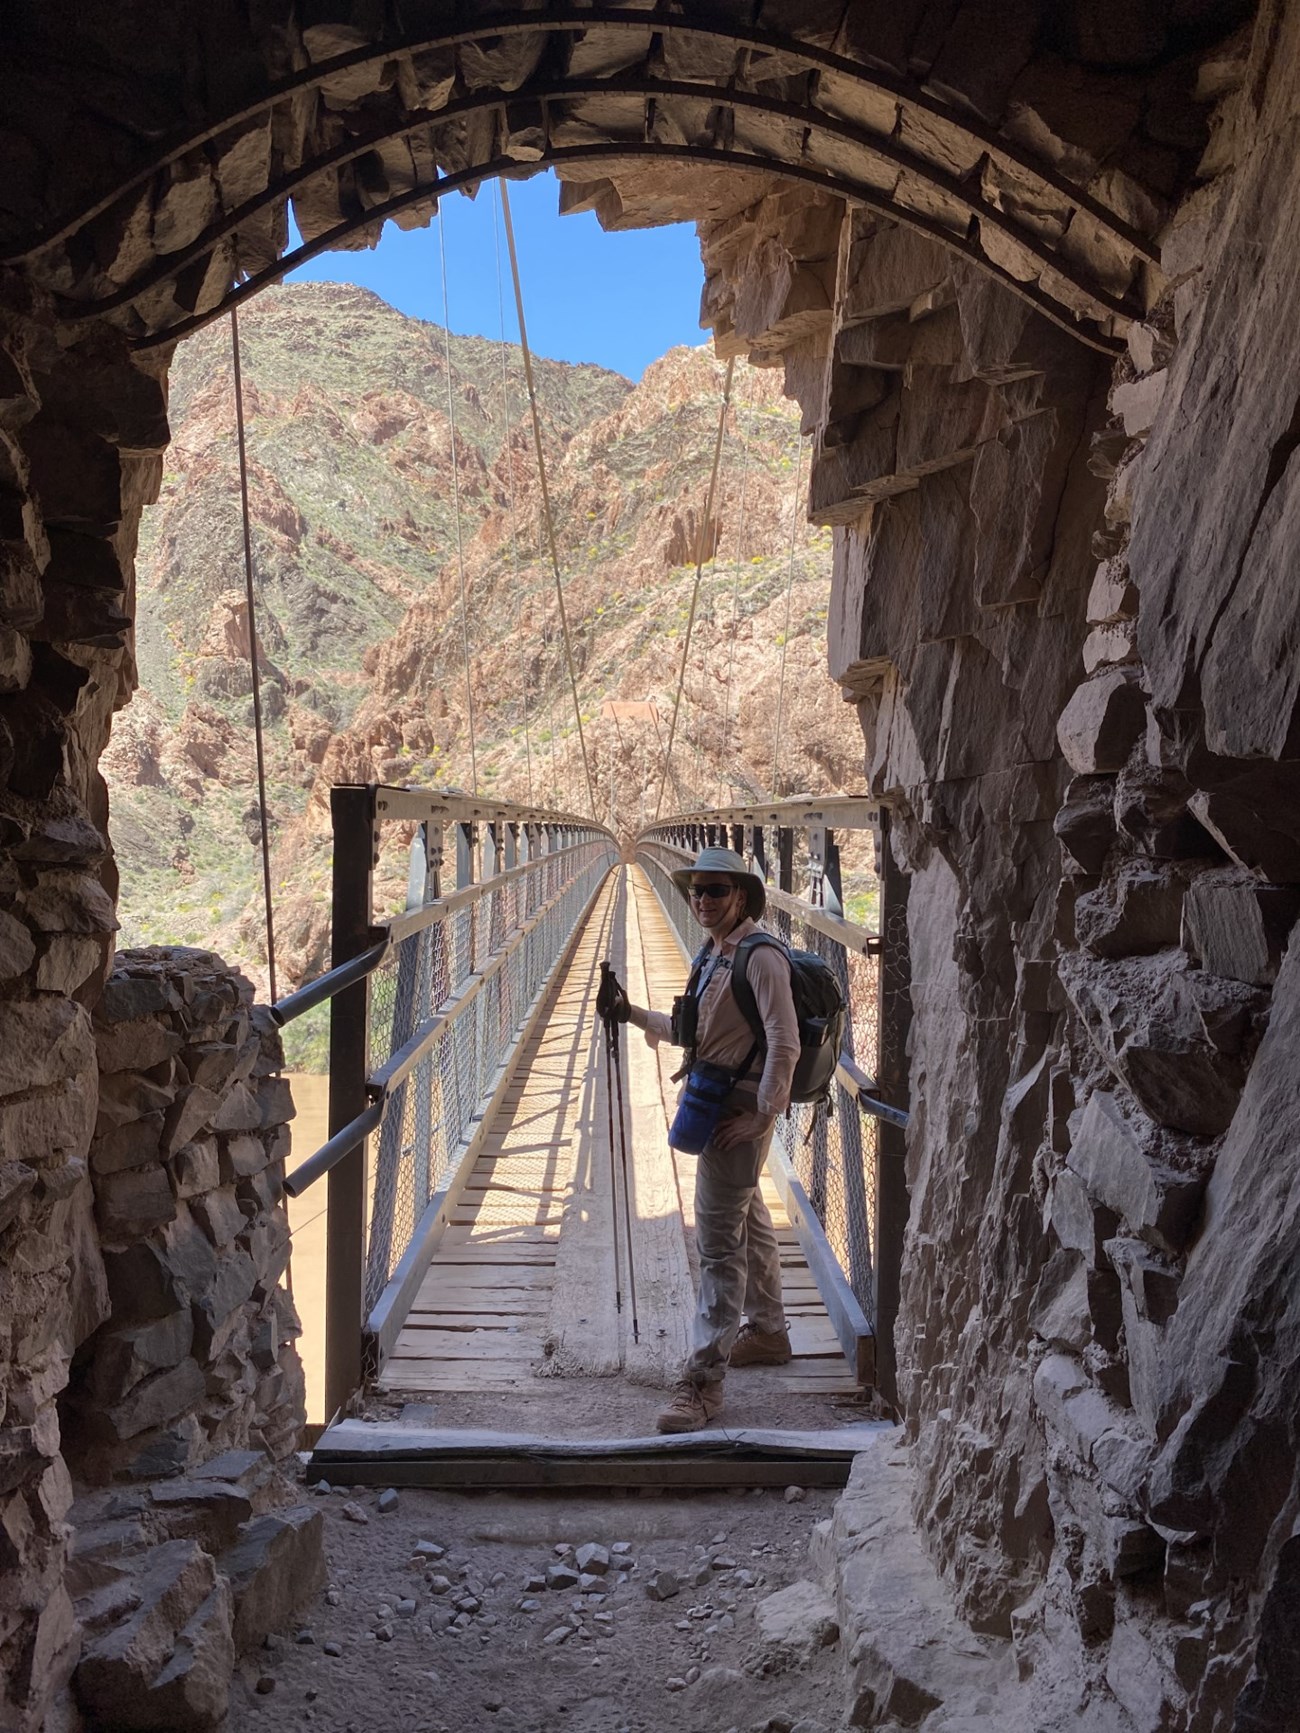 A woman in hiking gear stands in front of a rock opening out to a black suspension bridge.